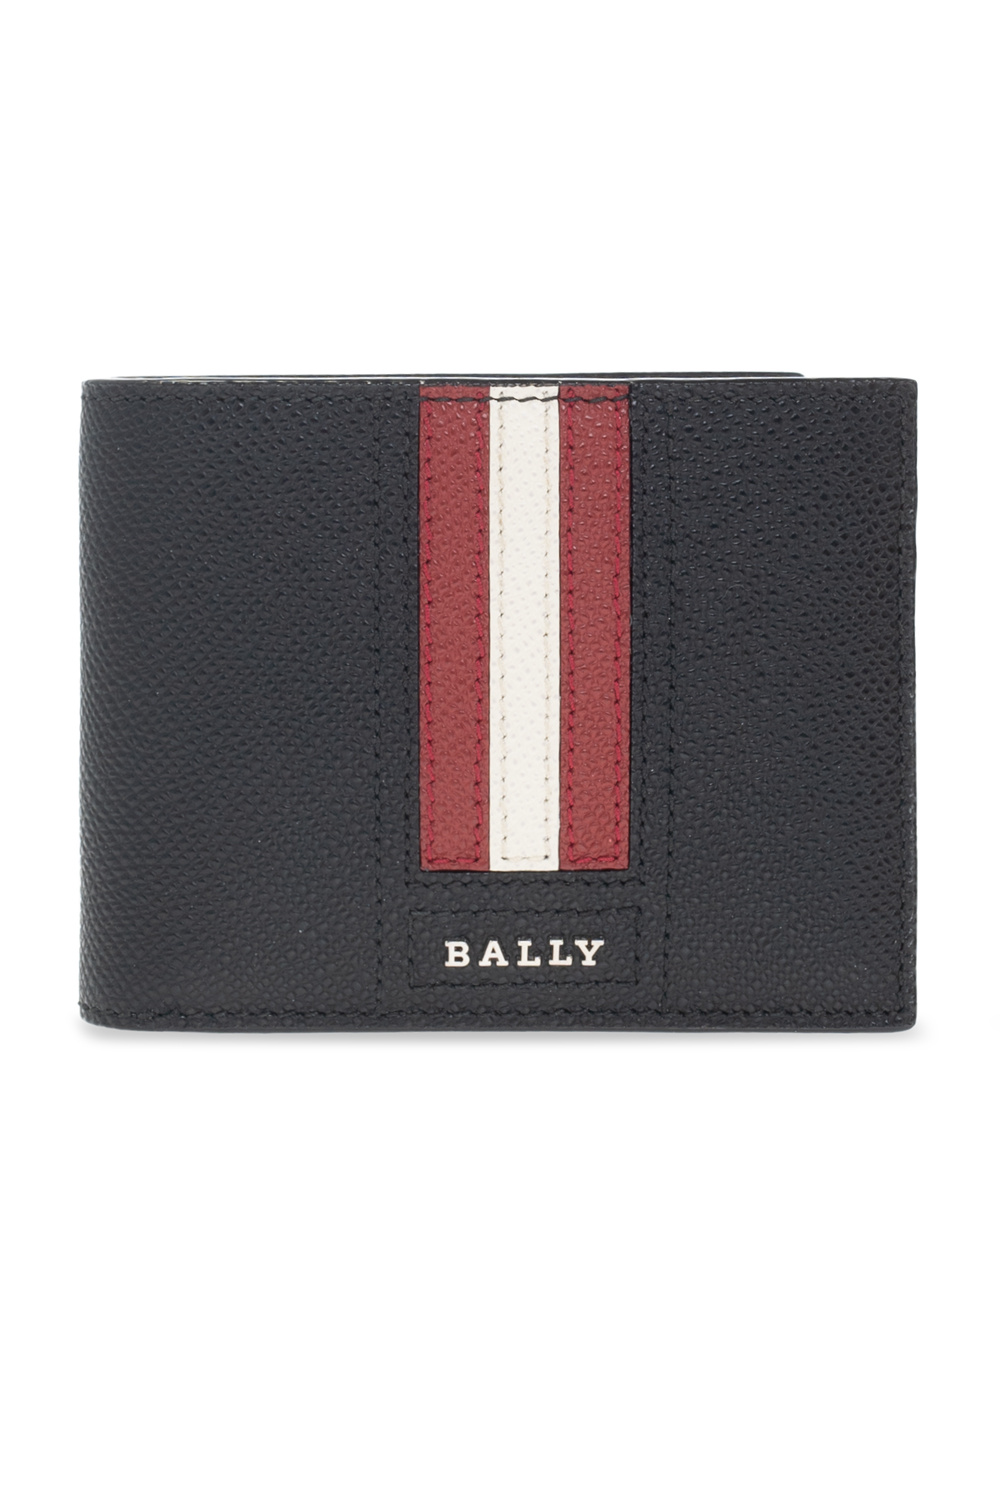 Bally Luggage and travel